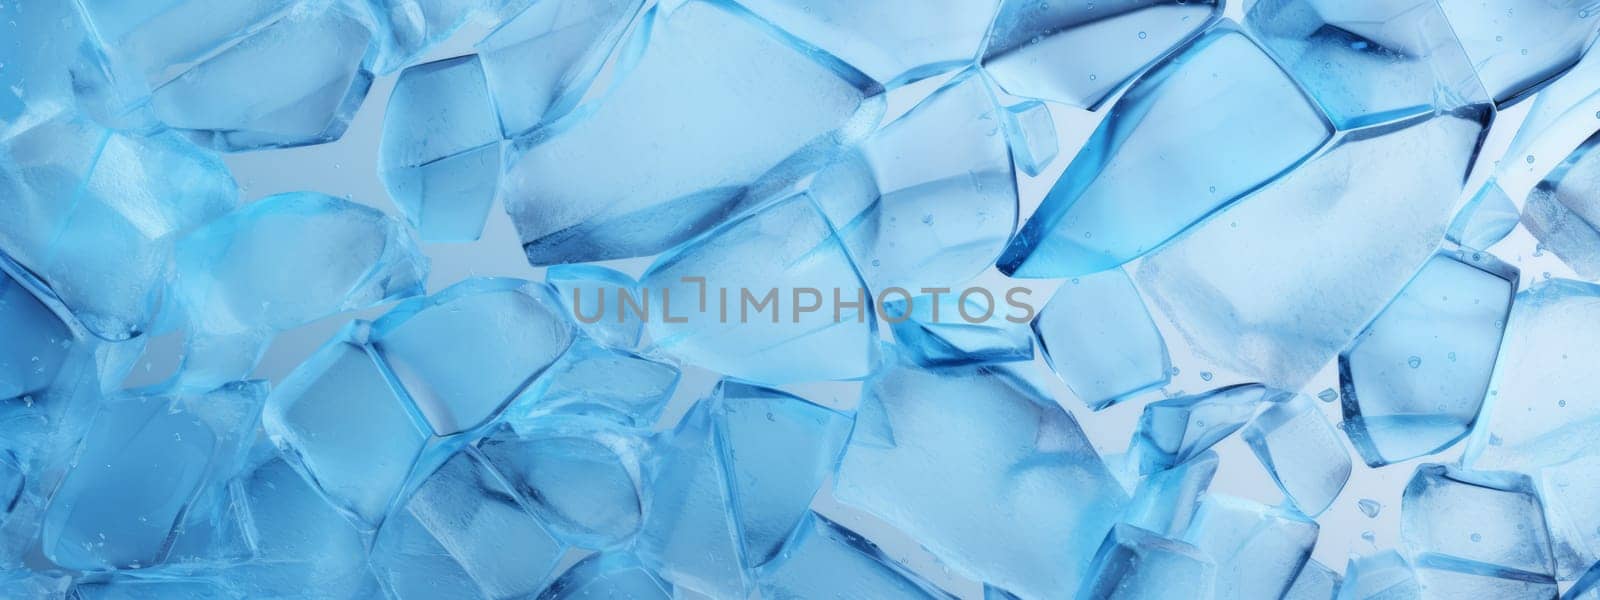 Crystal clear ice cubes seamless pattern texture background